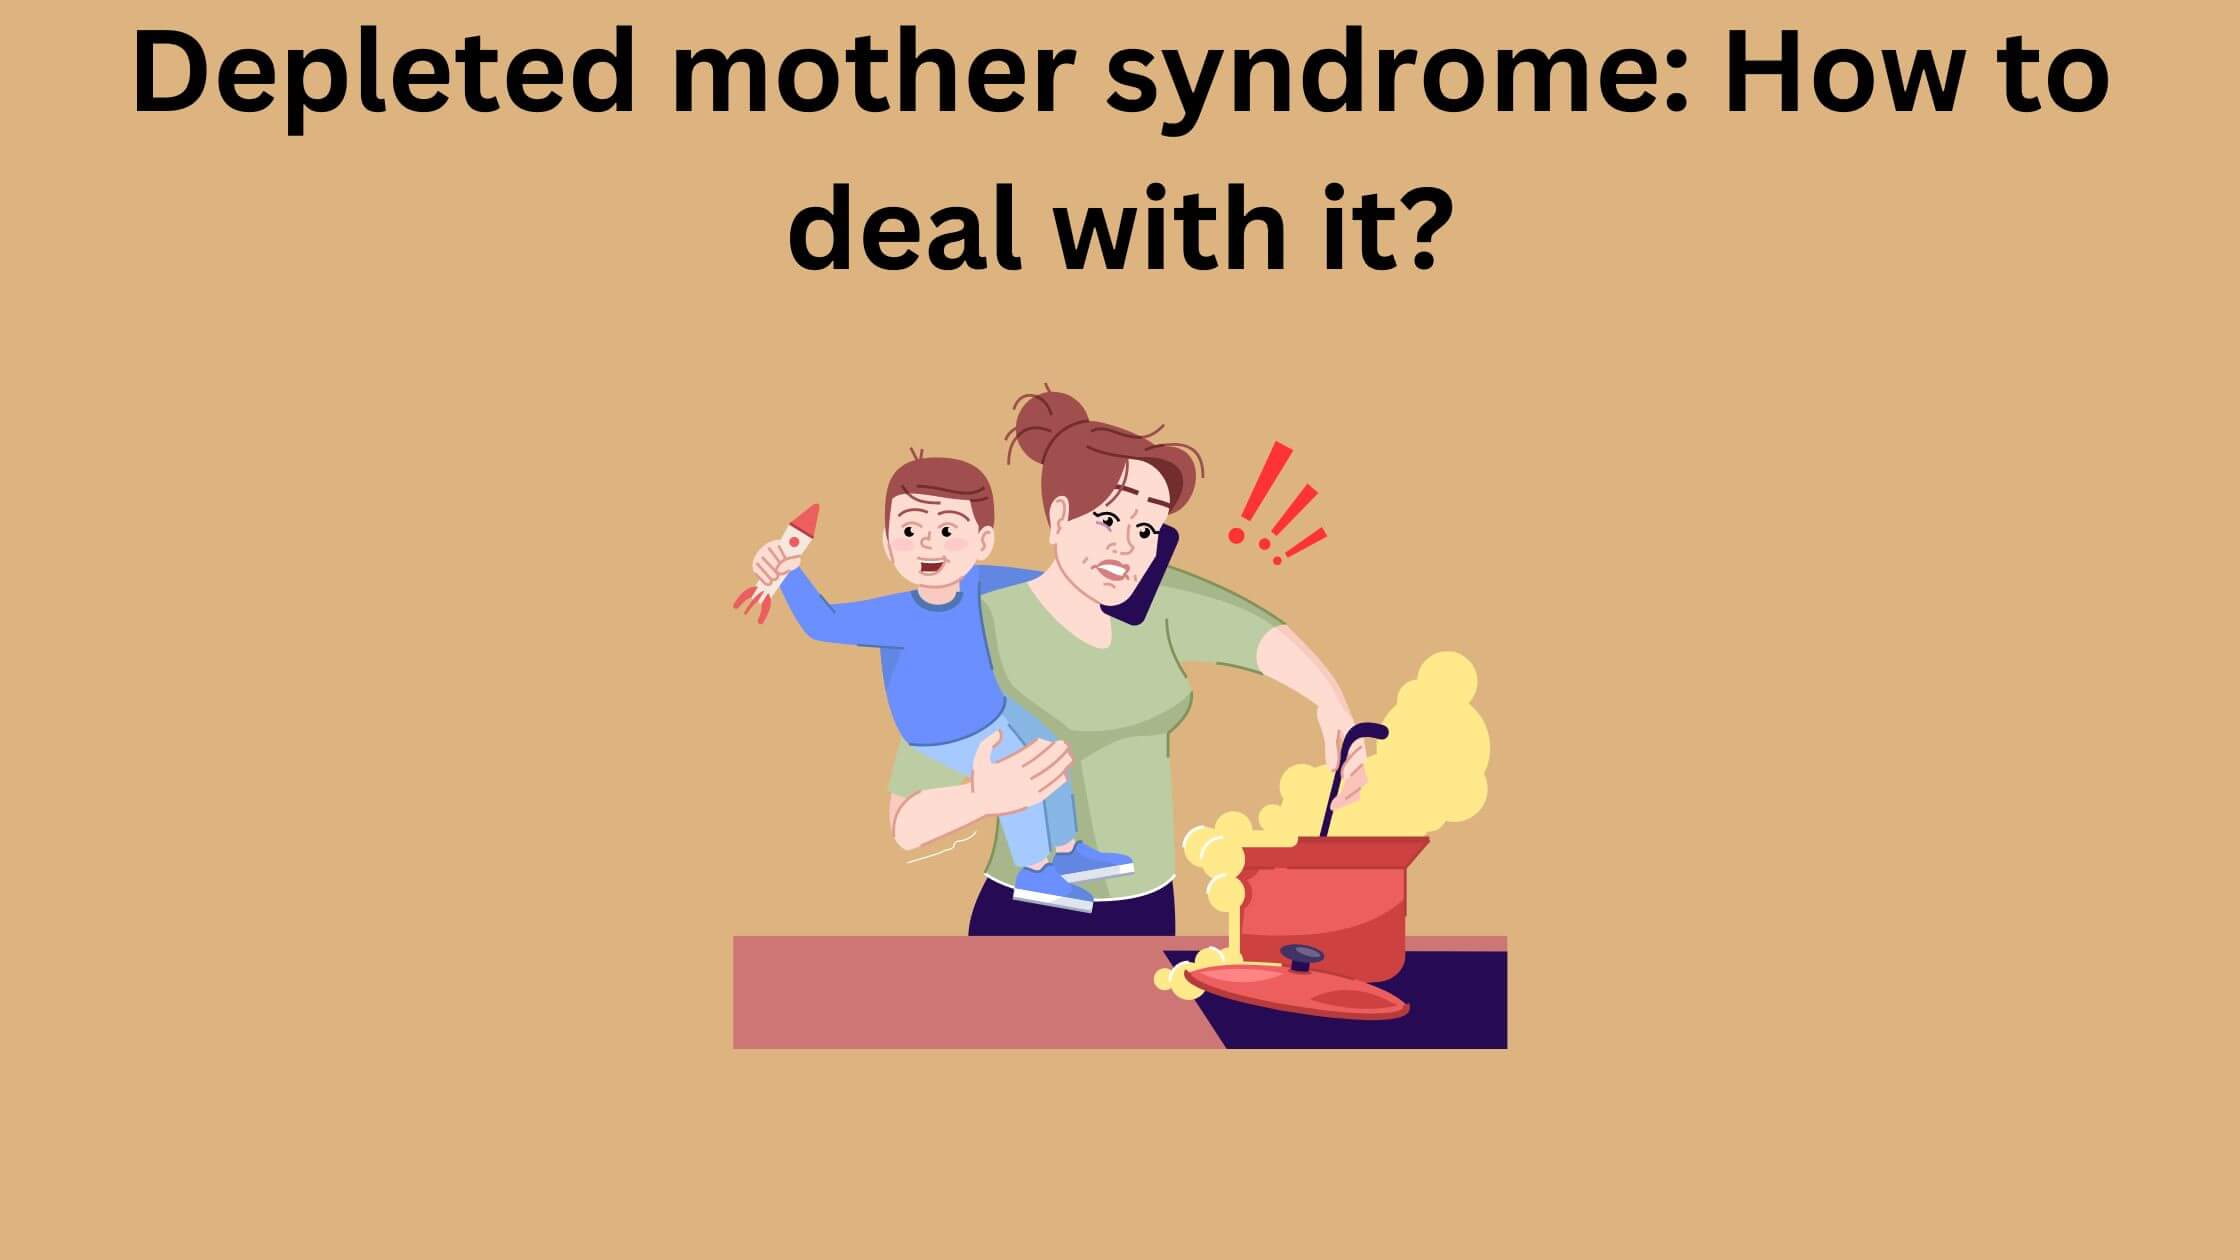 Depleted mother syndrome: How to deal with it?